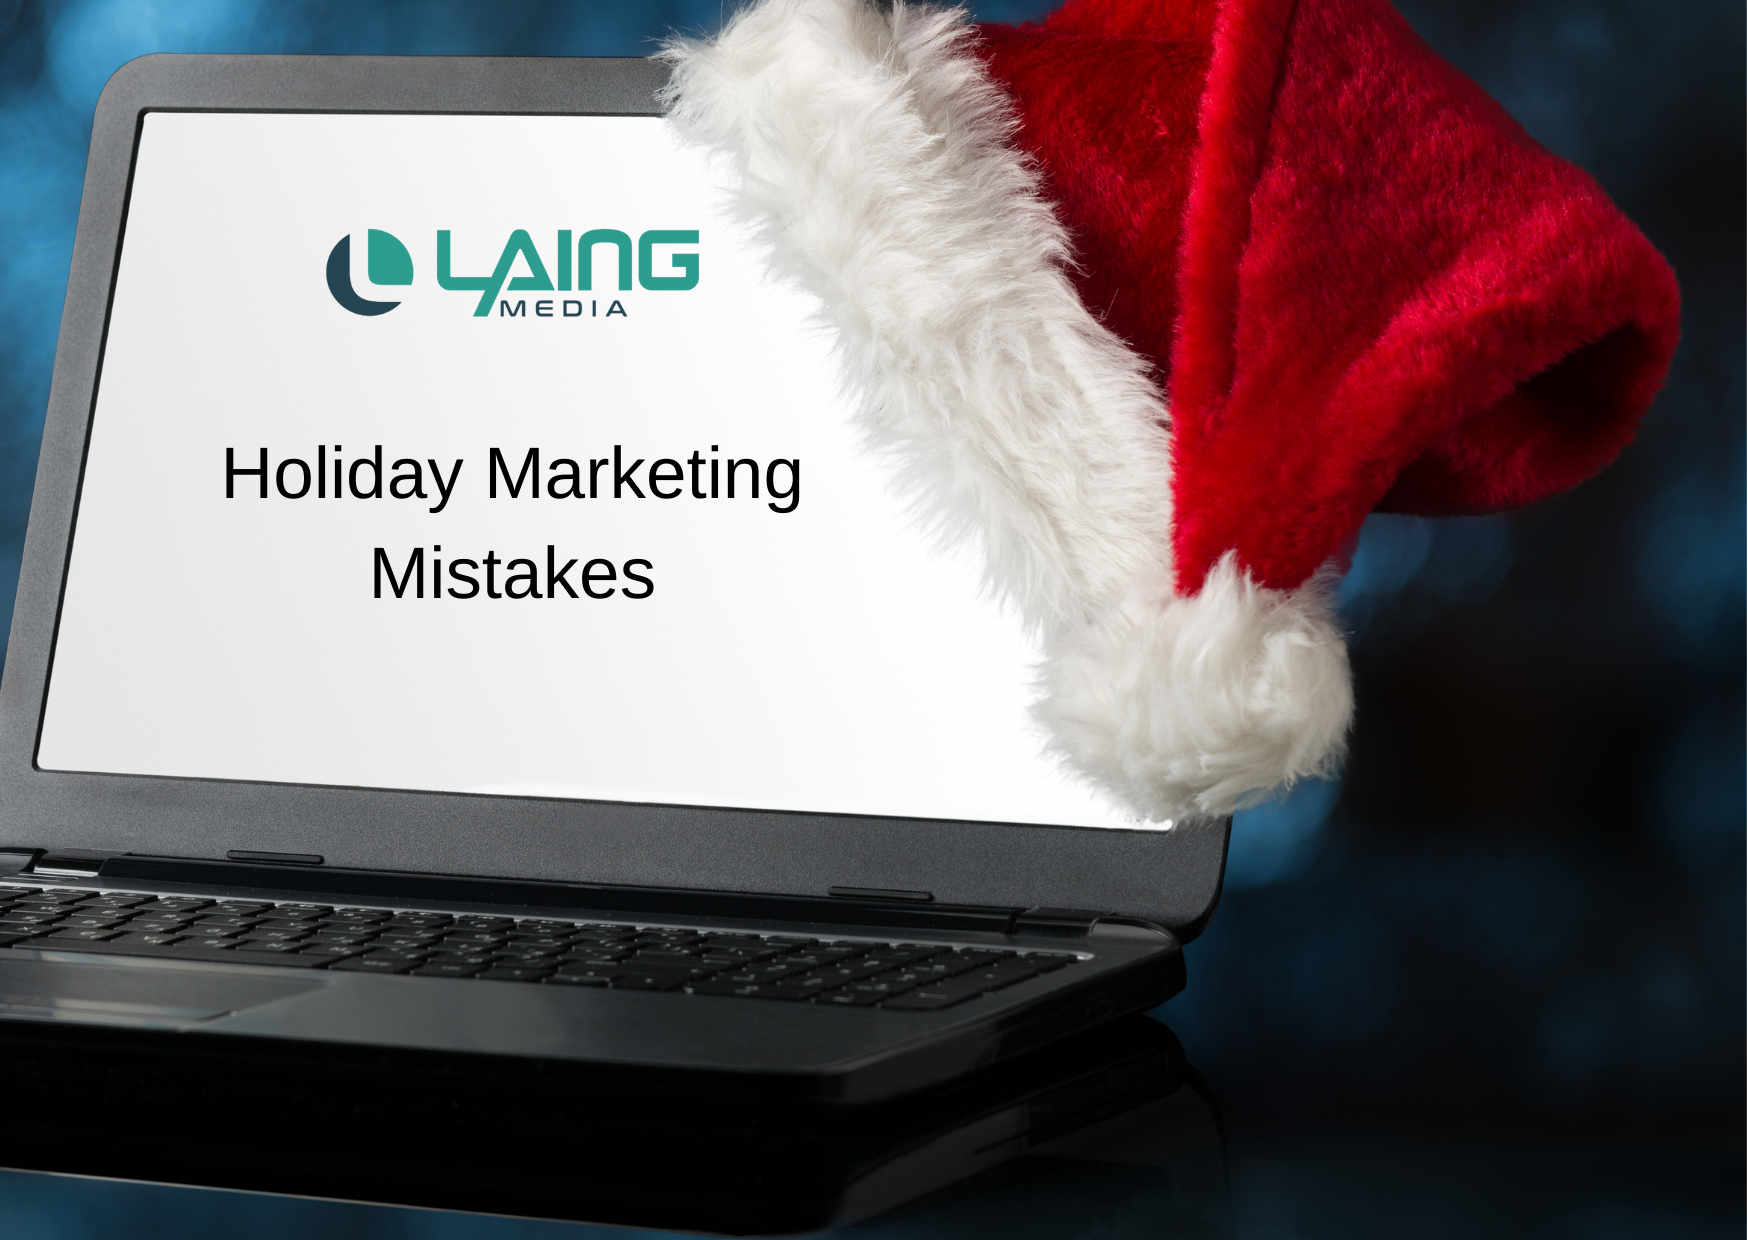 Holiday Marketing Mistakes with Laing Media